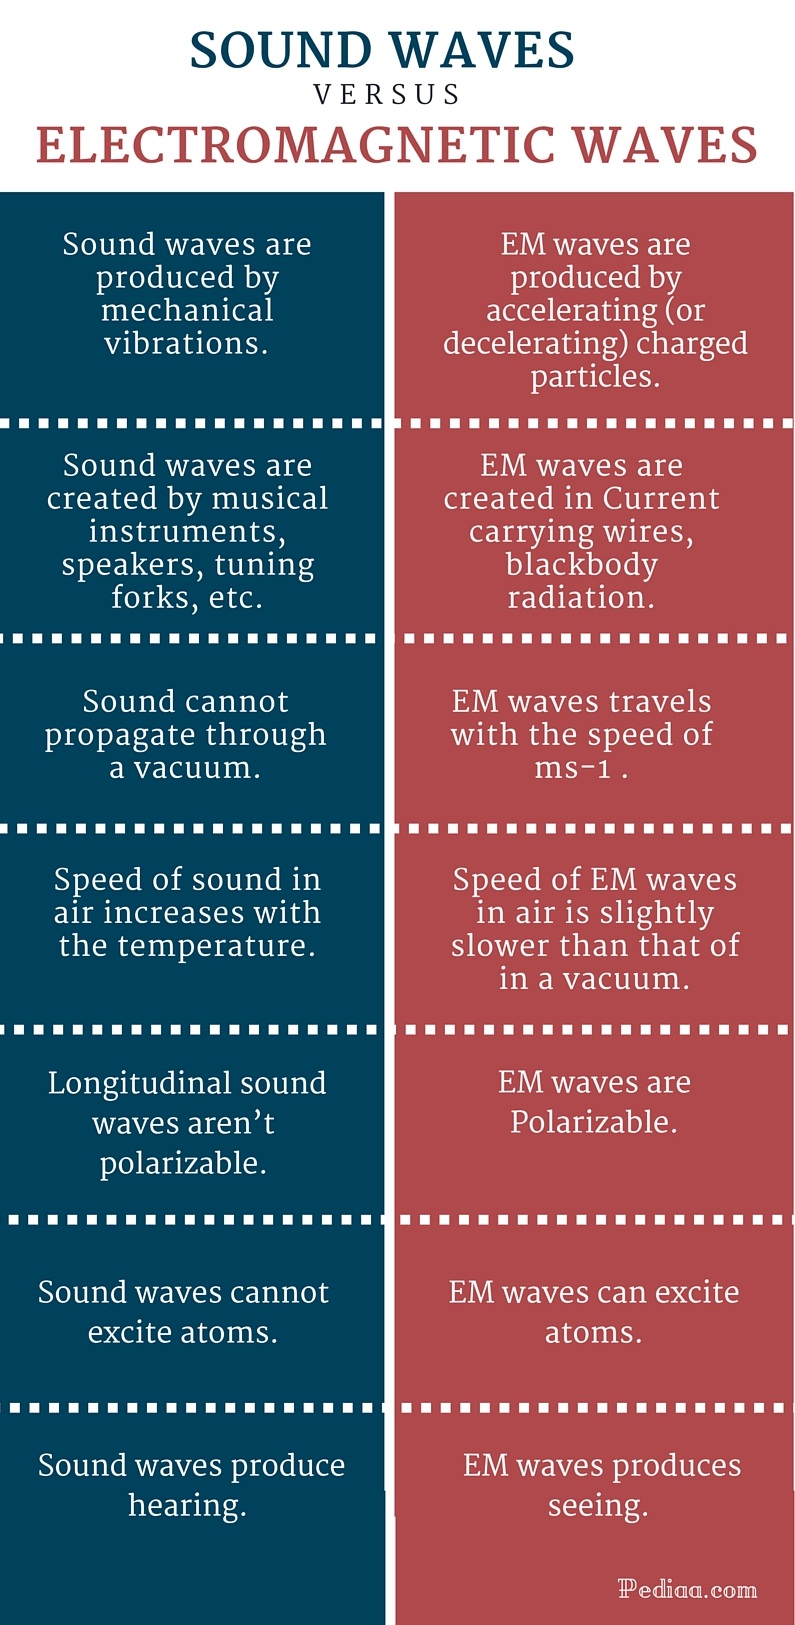 Difference Between Sound Waves and Electromagnetic Waves - infographic